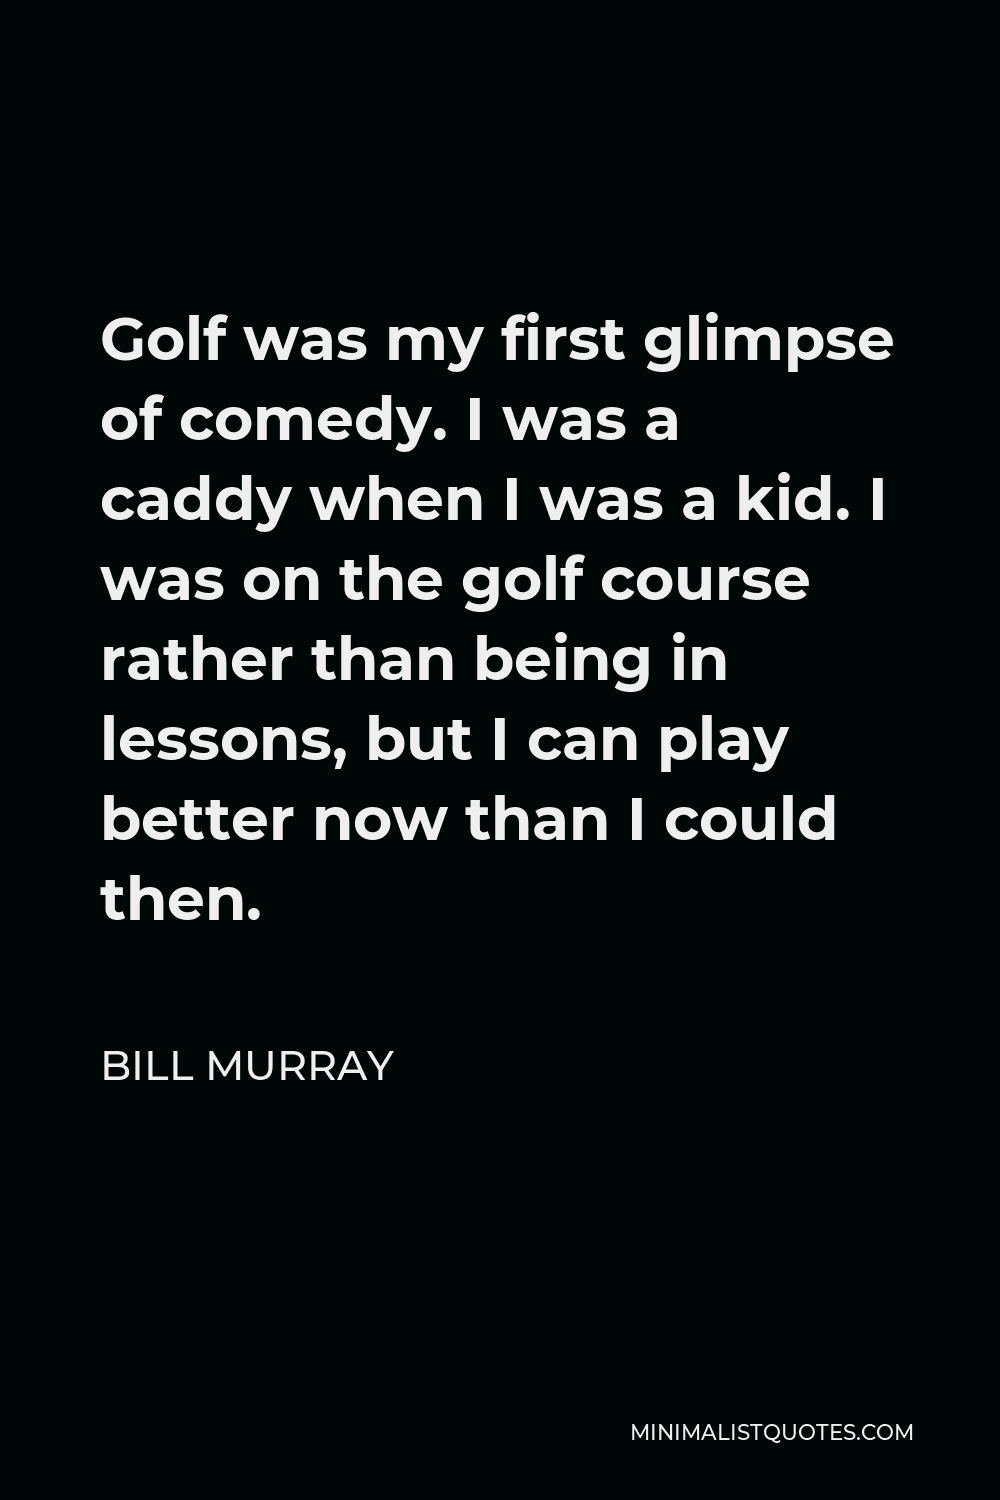 Bill Murray Quote - Golf was my first glimpse of comedy. I was a caddy when I was a kid. I was on the golf course rather than being in lessons, but I can play better now than I could then.